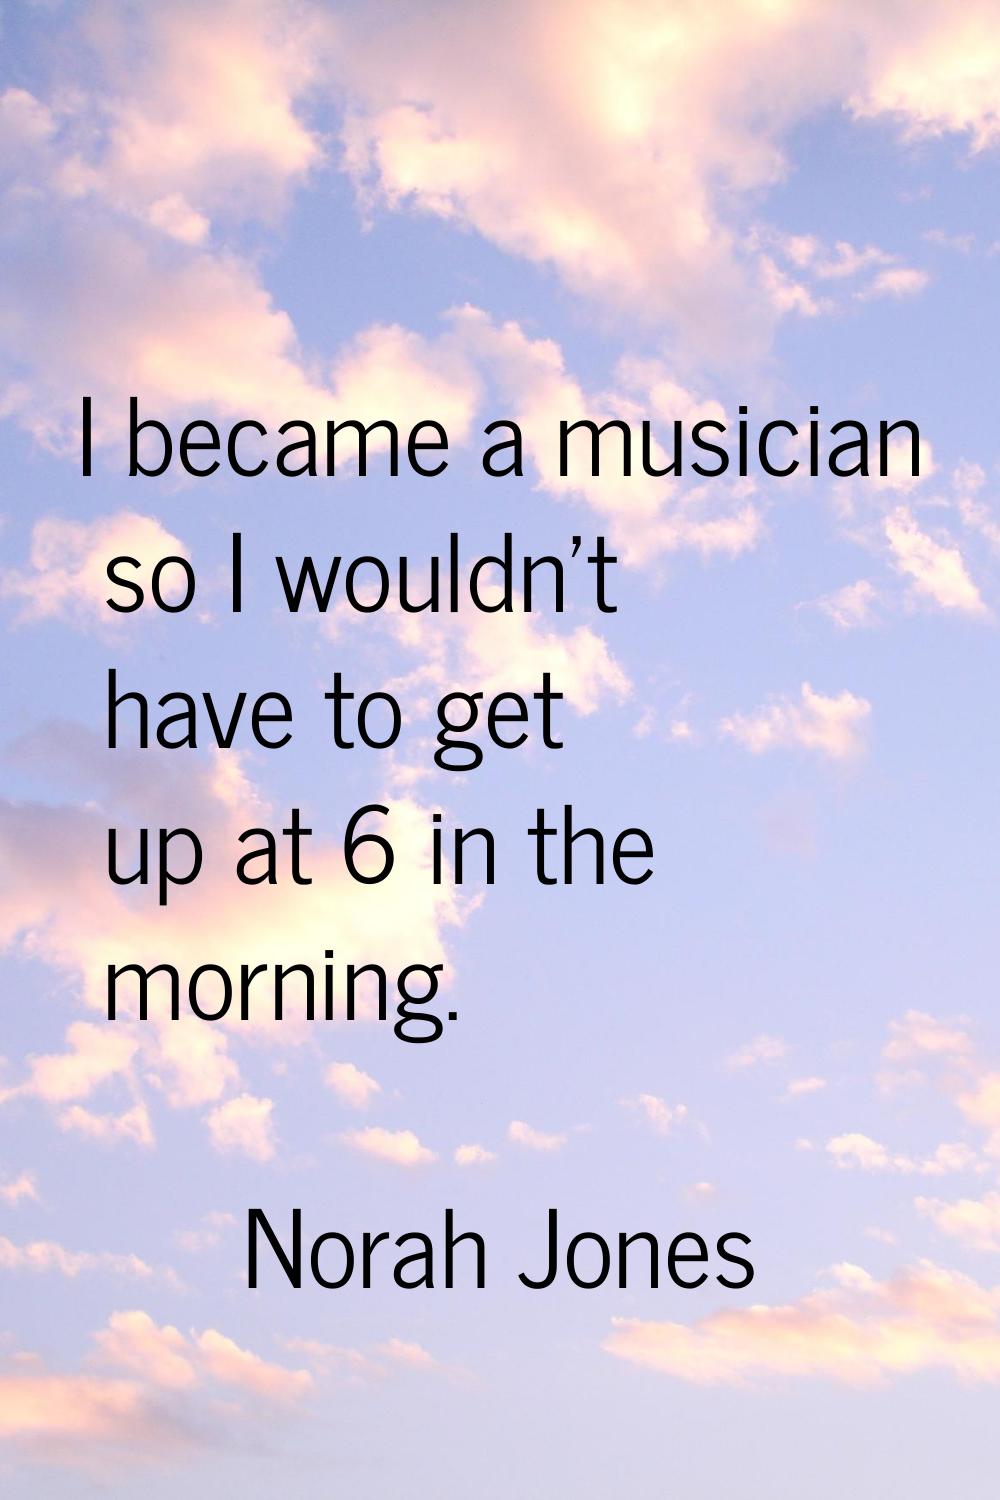 I became a musician so I wouldn't have to get up at 6 in the morning.